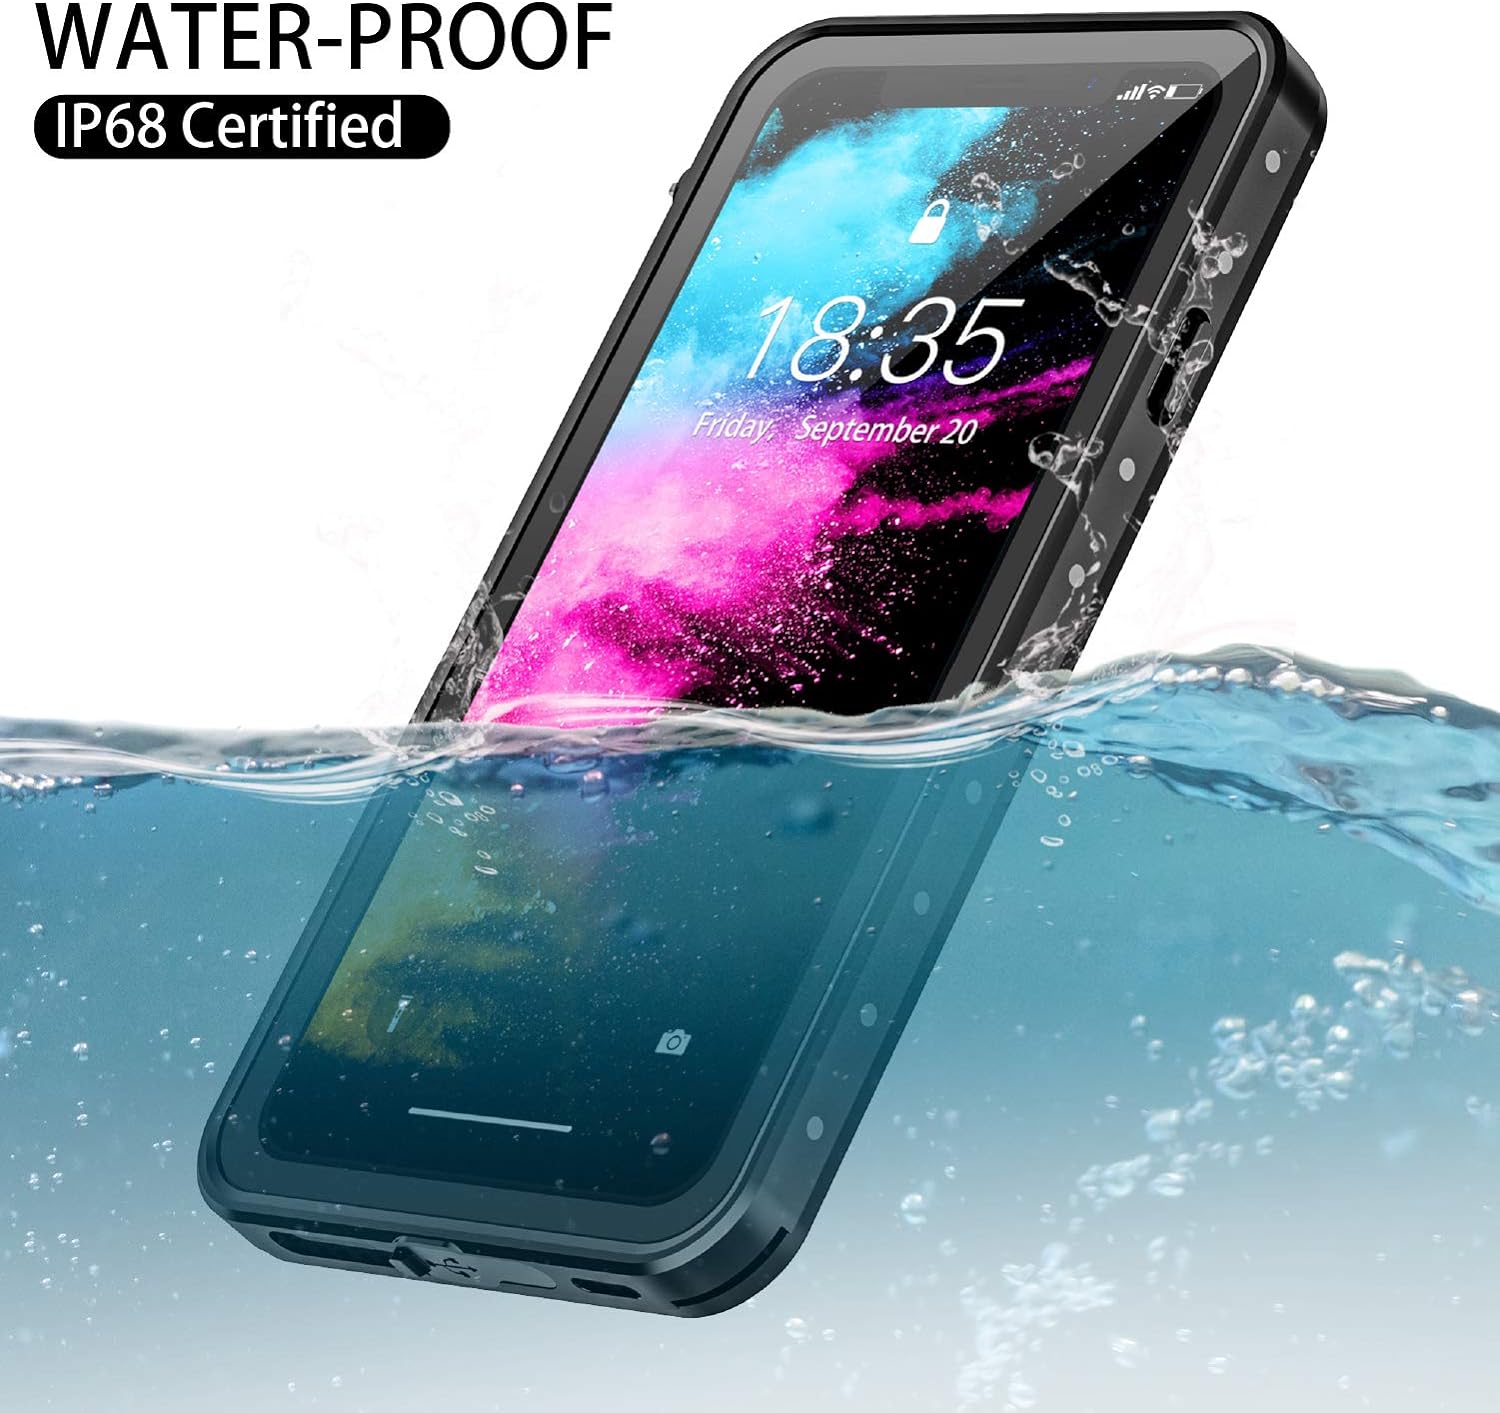 Waterproof Shockproof Dustproof Snowproof Case for iPhone X & Xs *Free Shipping*